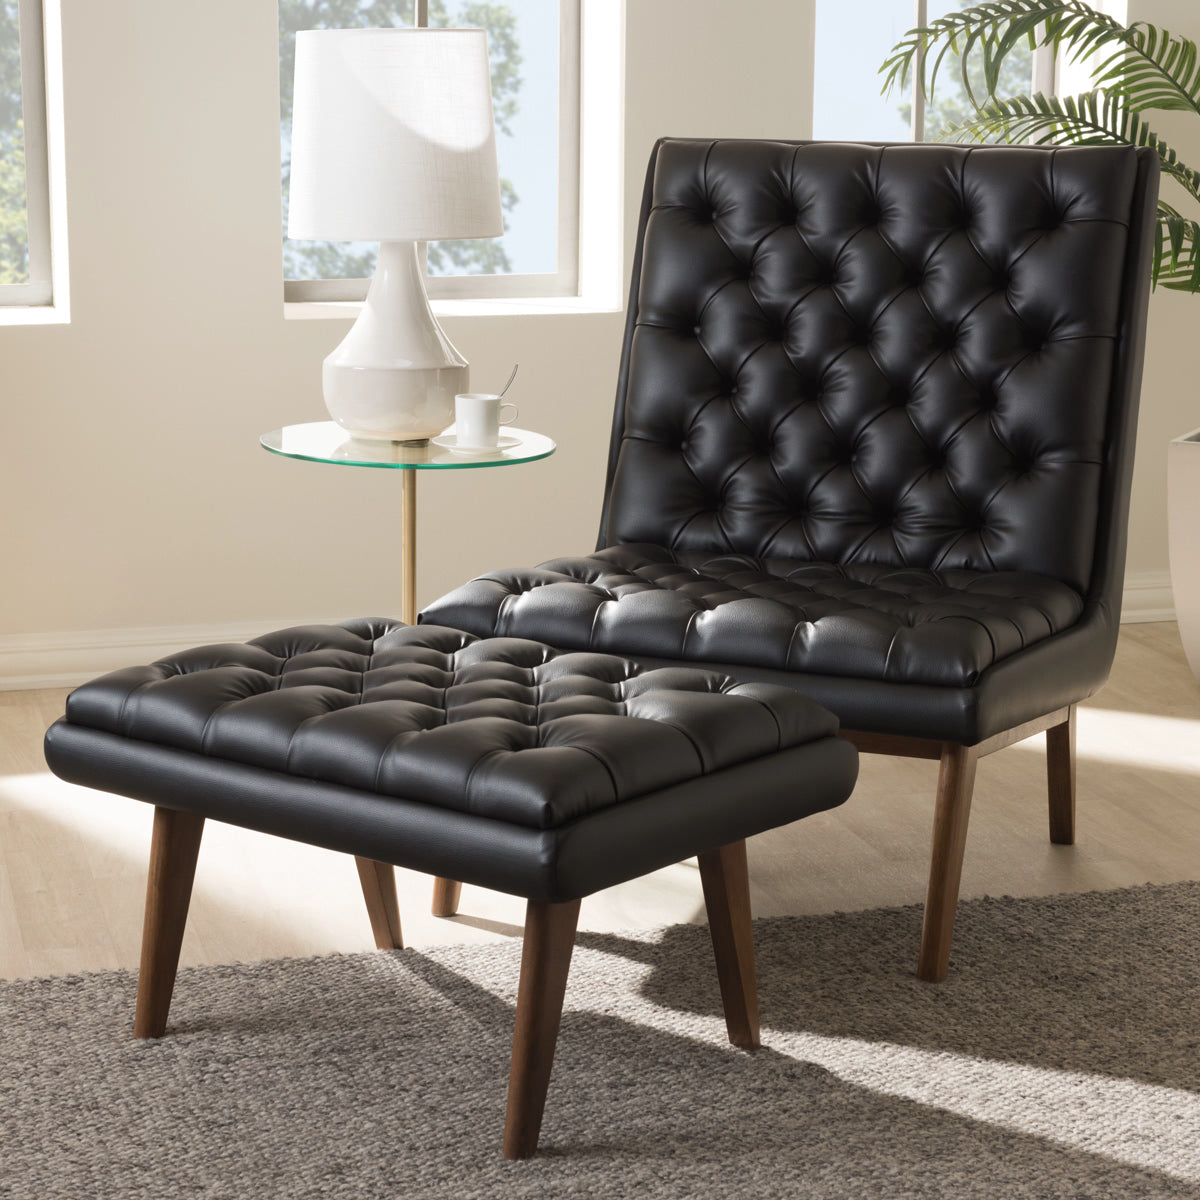 Baxton Studio Annetha Mid-Century Modern Black Faux Leather Upholstered Walnut Finished Wood Chair And Ottoman Set Baxton Studio-0-Minimal And Modern - 7